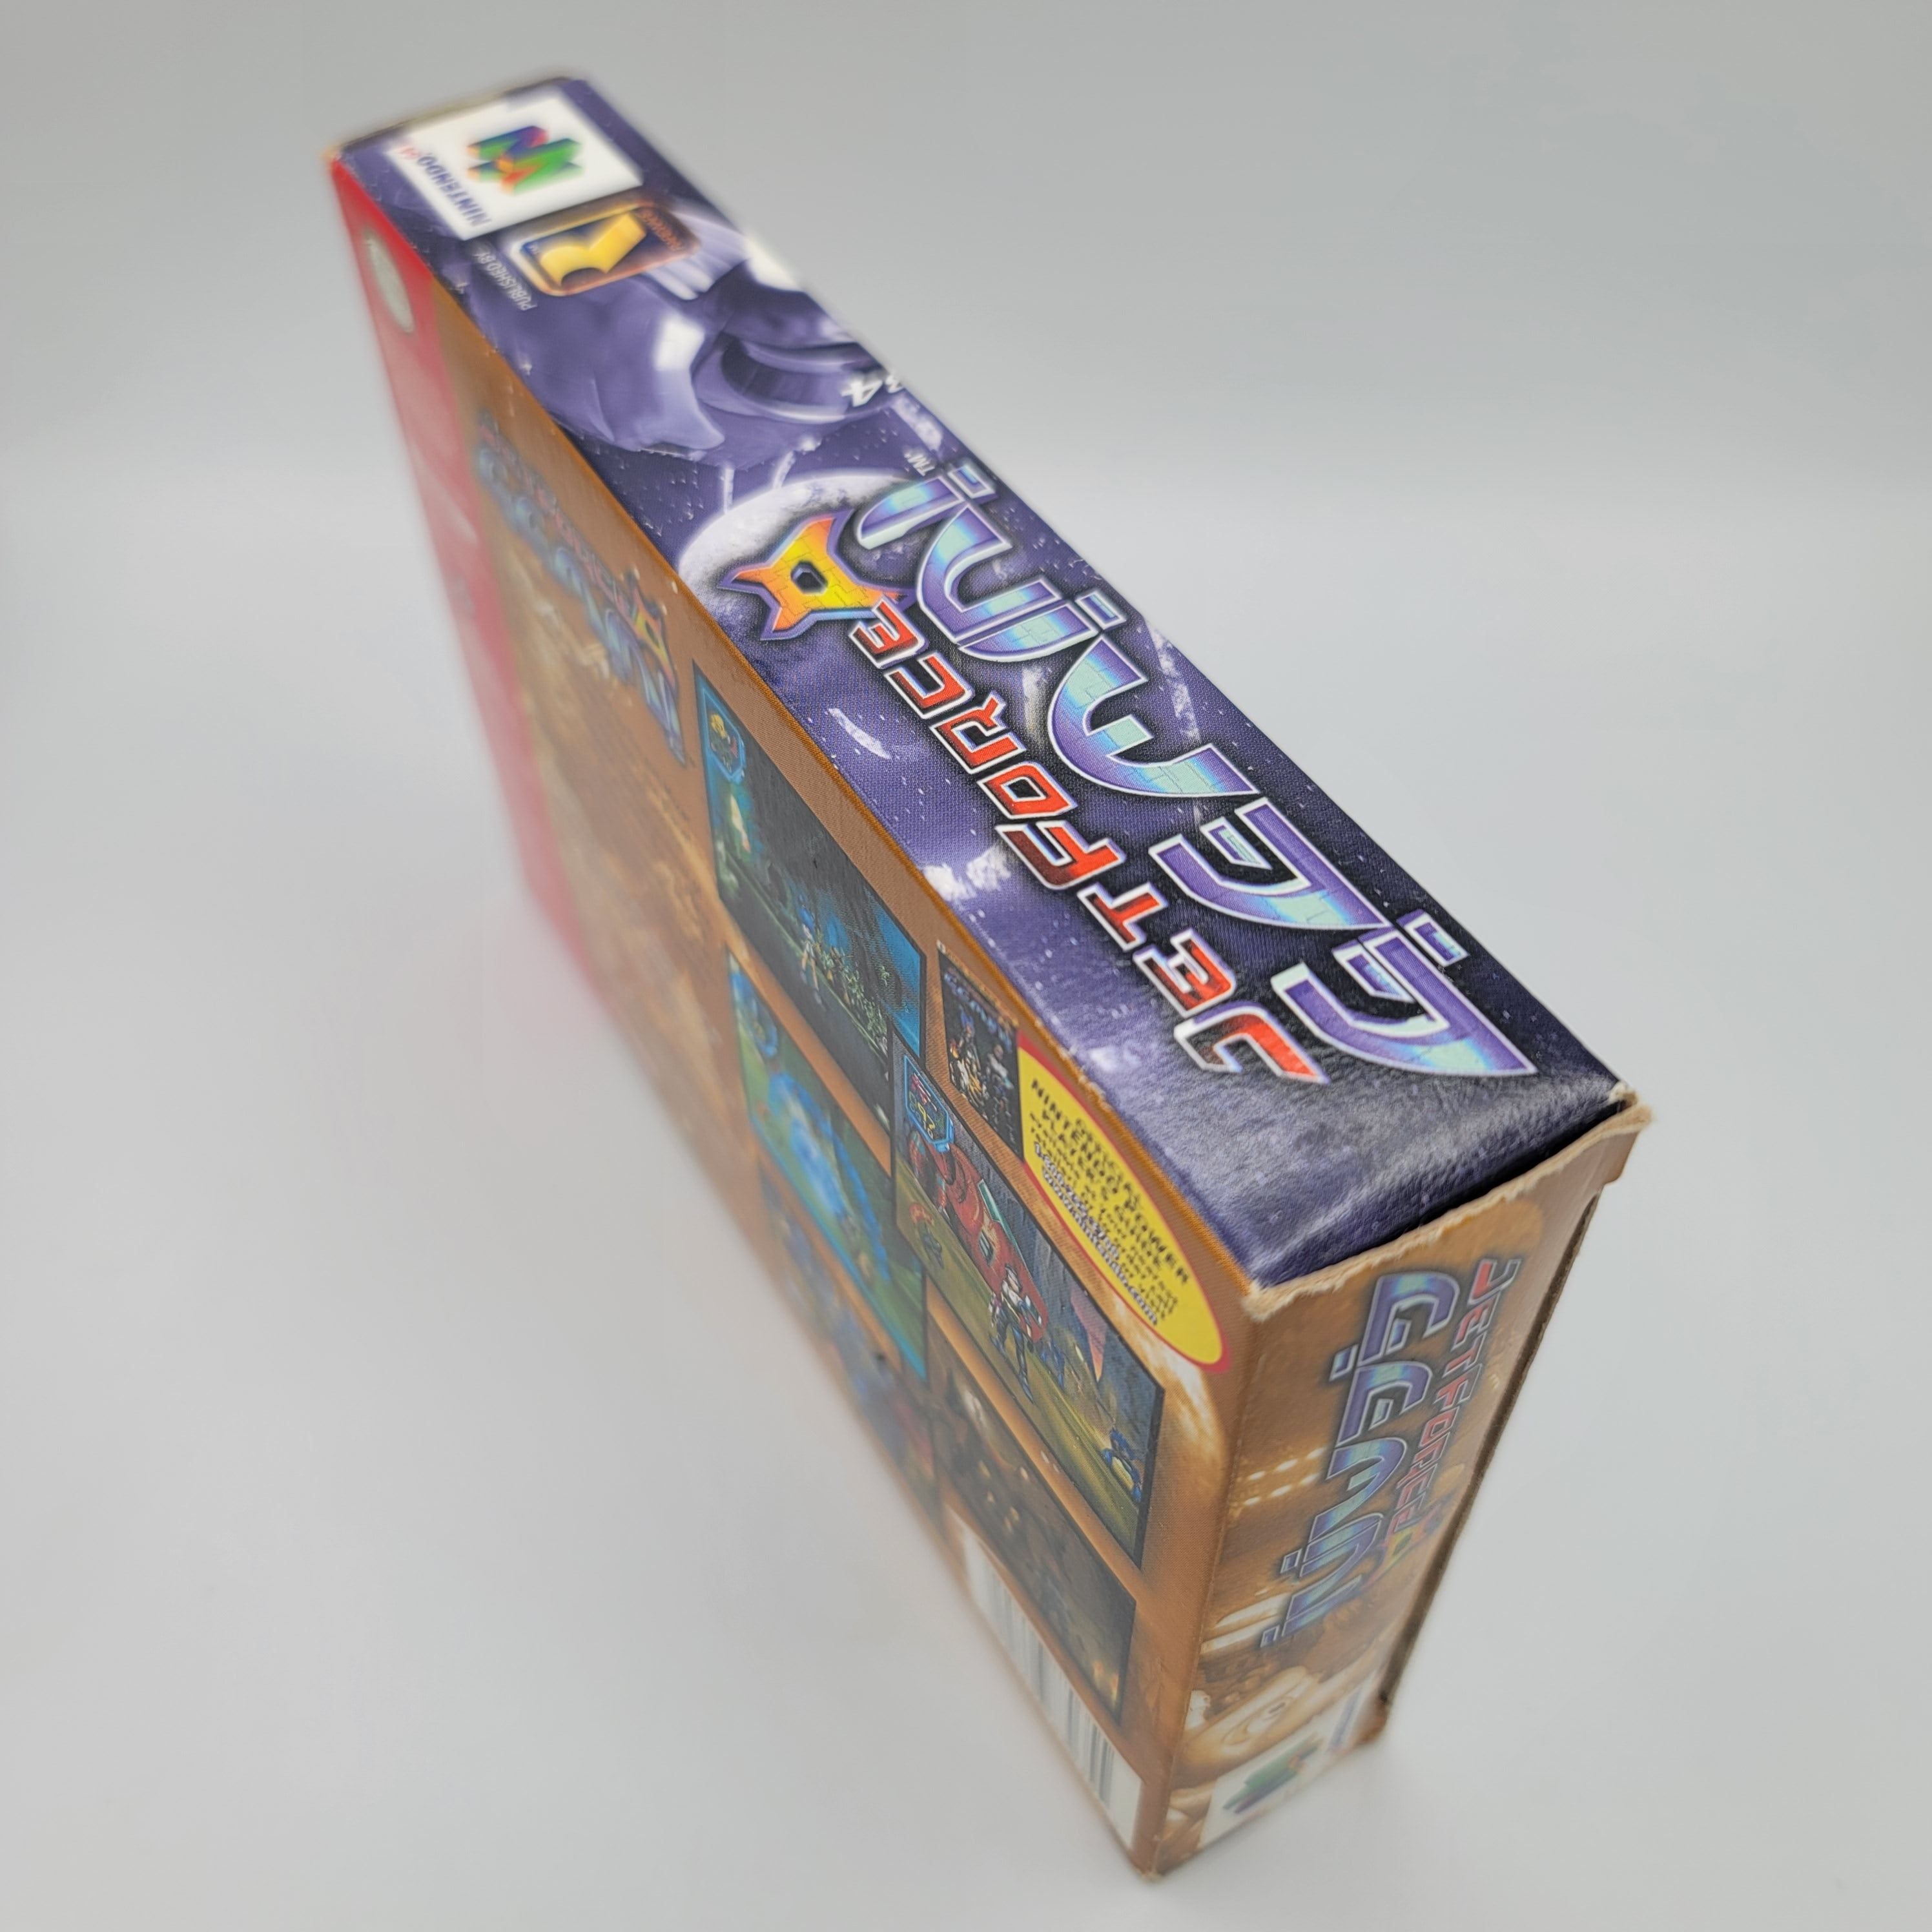 N64 - Jet Force Gemini (Complete in Box / A / With Manual)